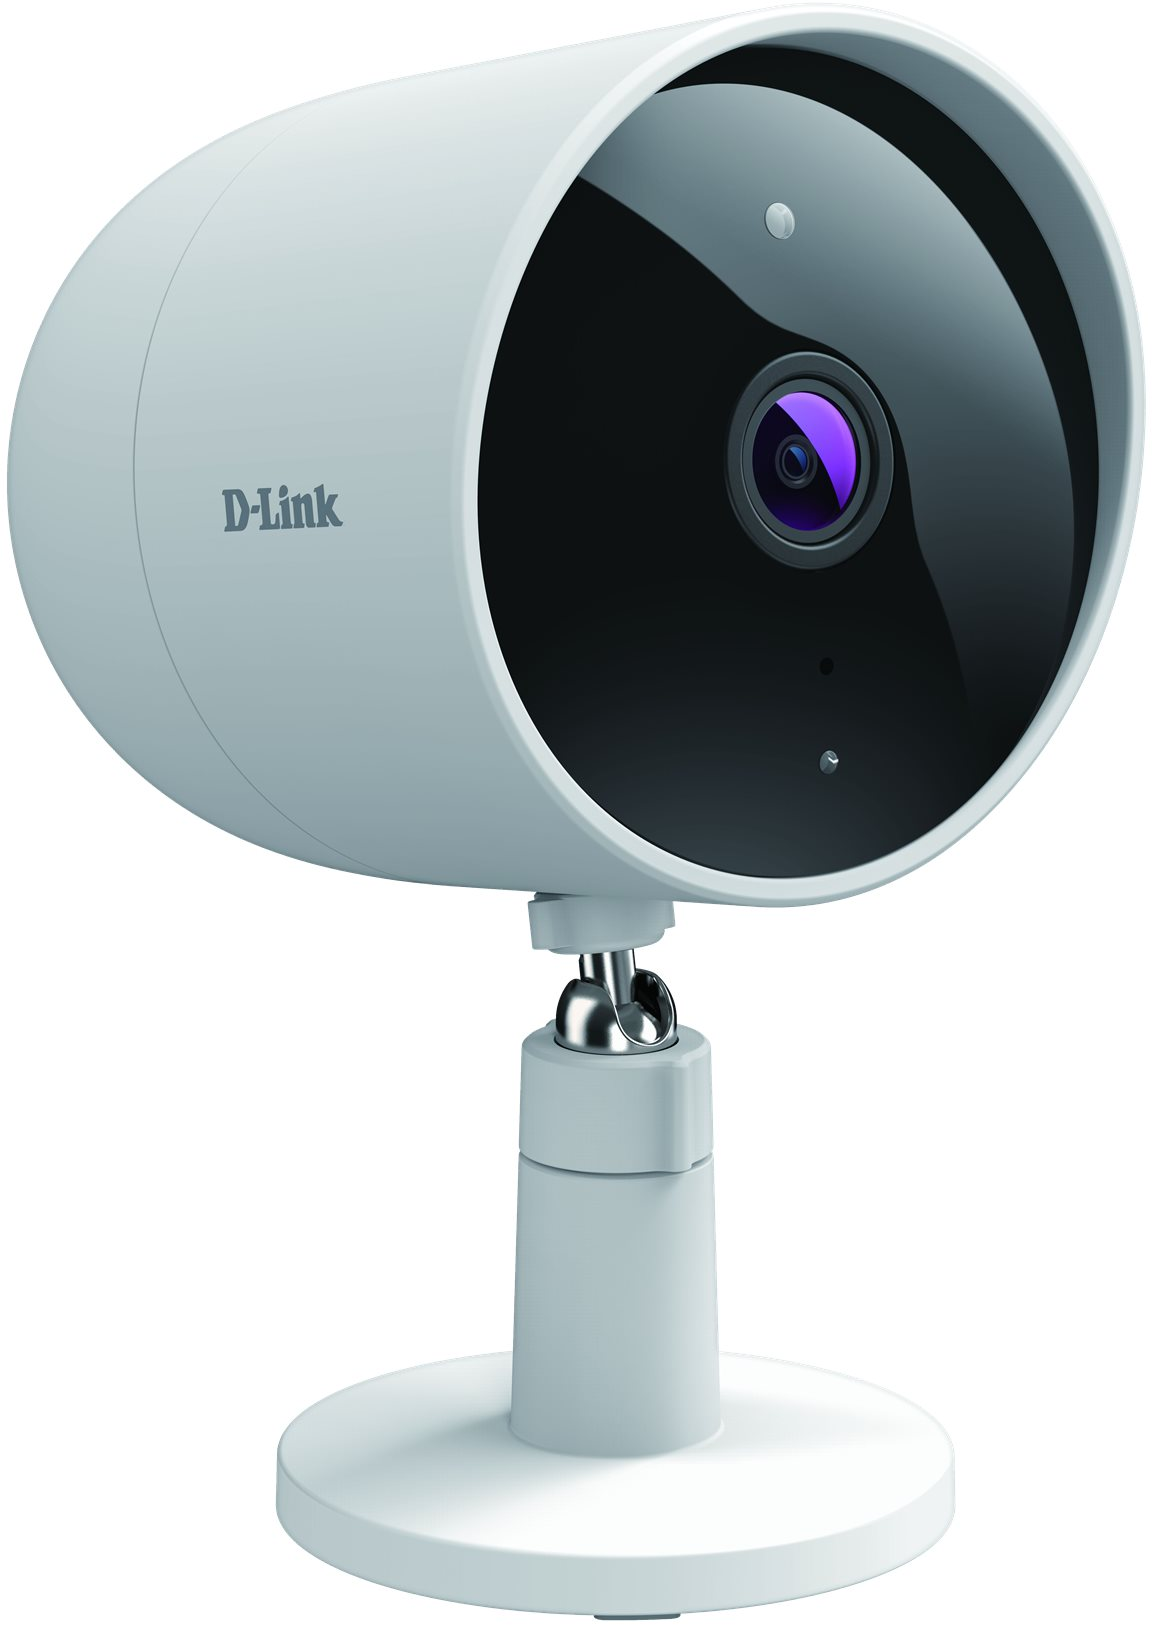 790069455124 D-LINK Full HD Outdoor Wi-Fi Camera Hus & Have,Smart Home,Alarm & overvågning 20500239490 DCS-8302LH